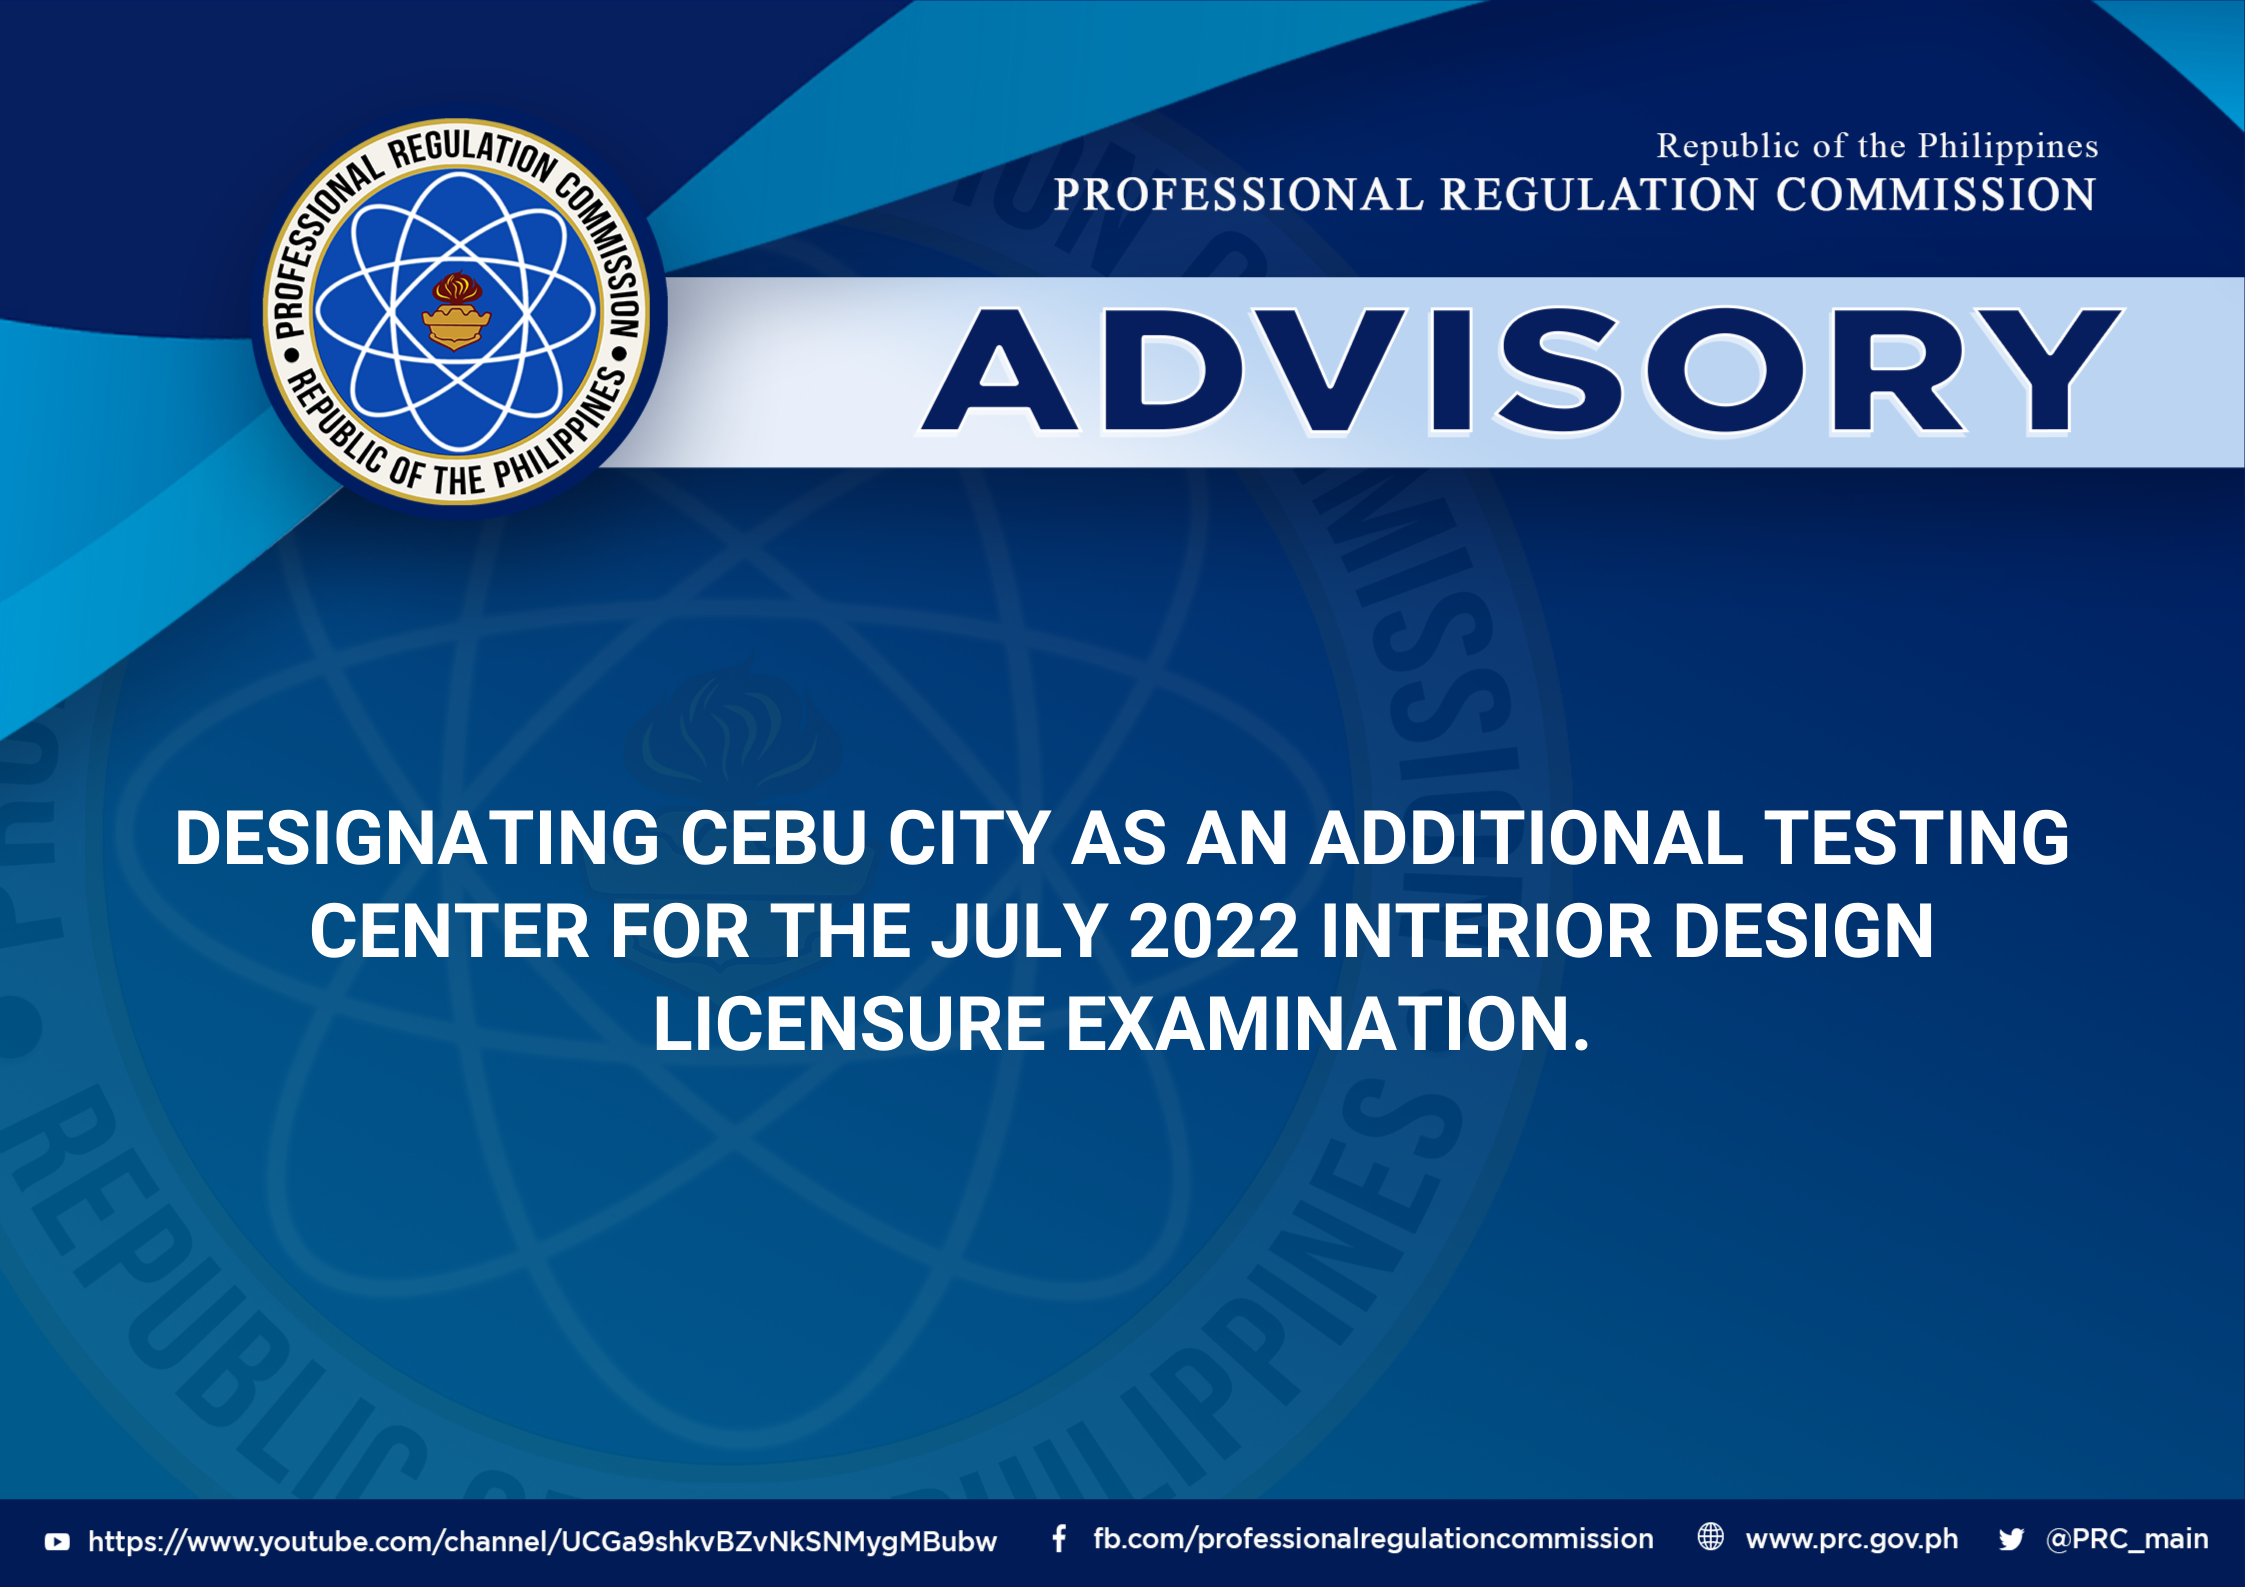 DESIGNATING CEBU CITY AS AN ADDITIONAL TESTING CENTER FOR THE JULY 2022